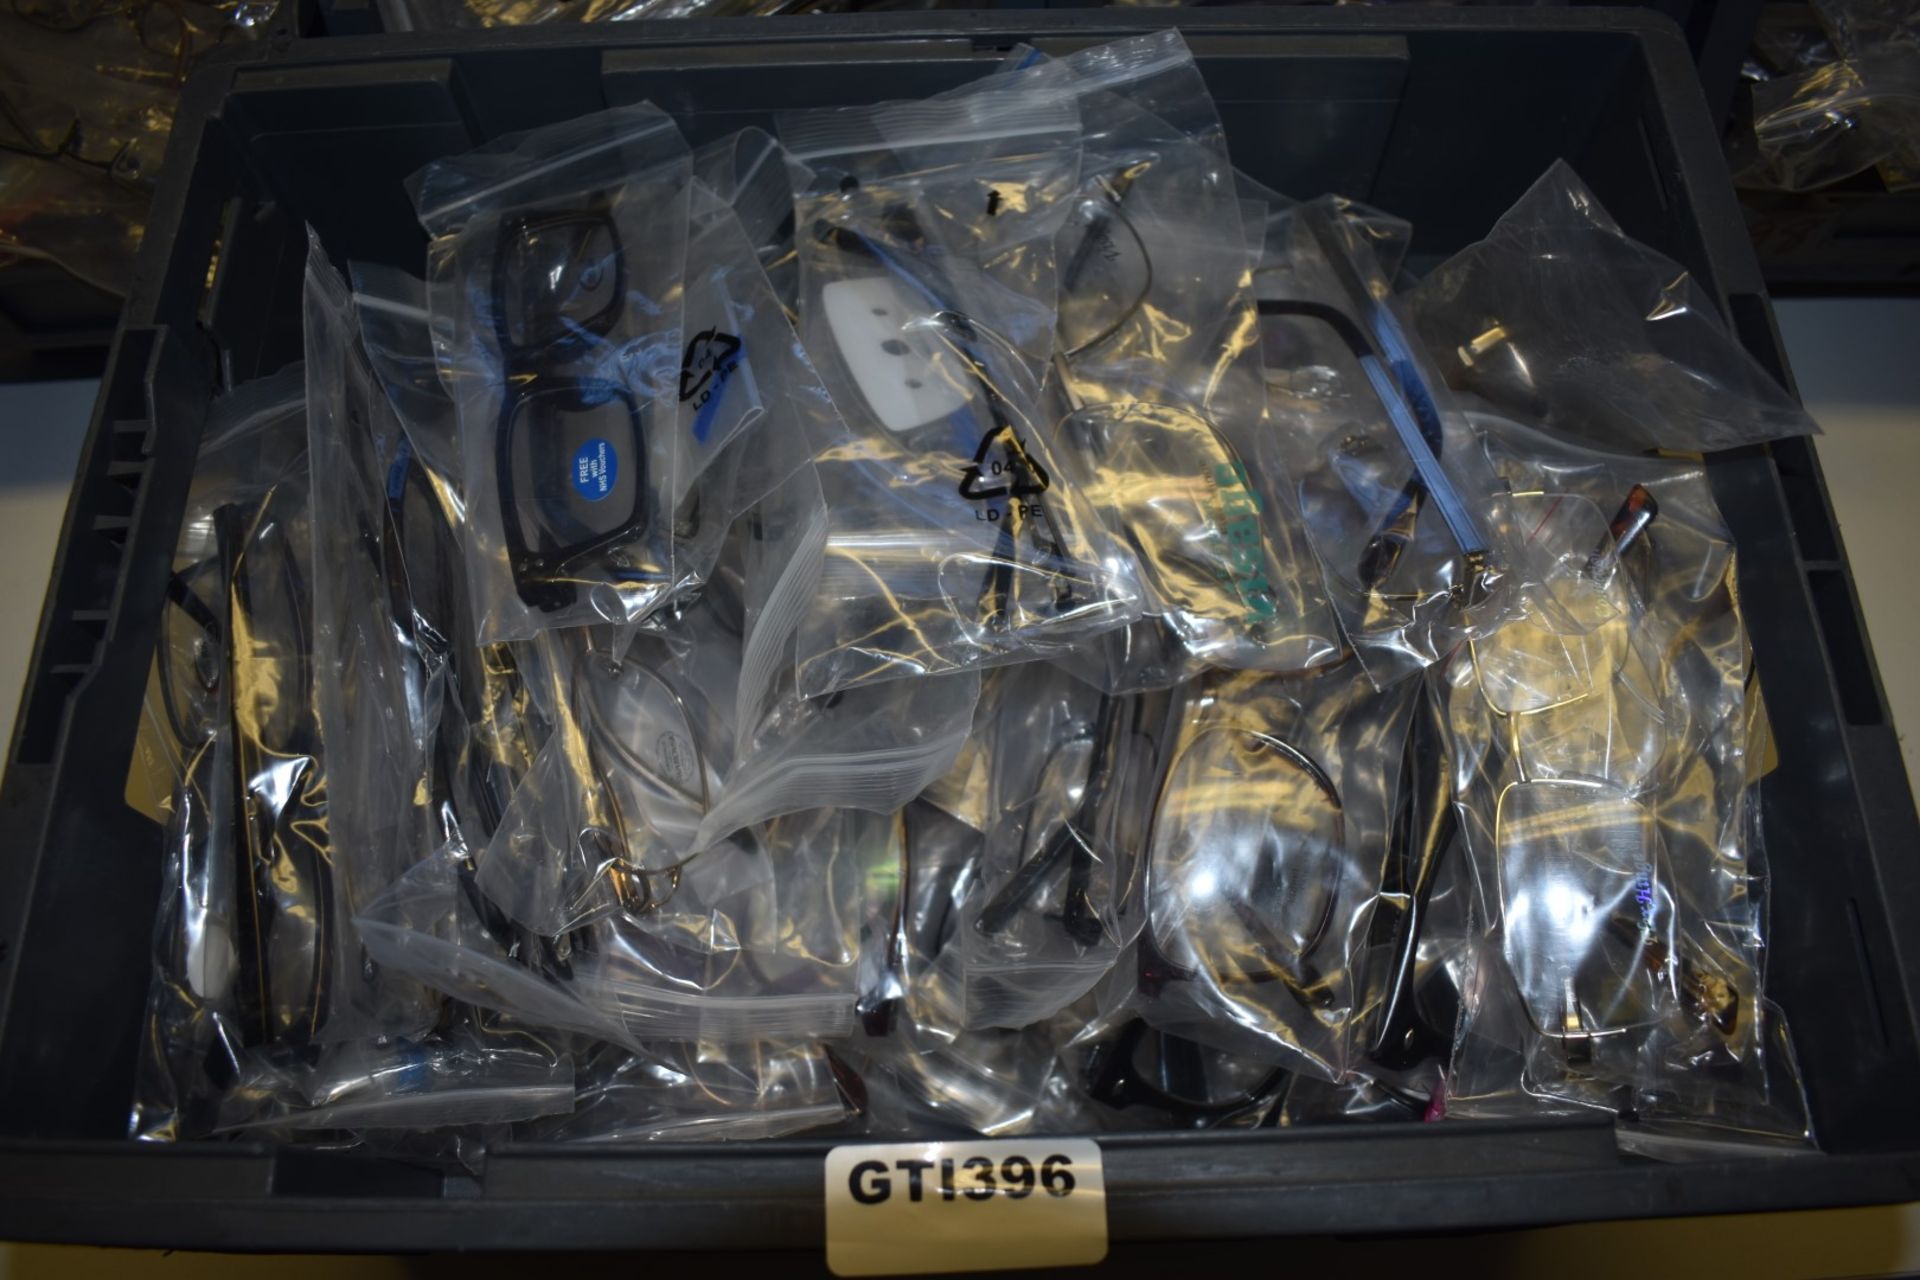 Approximately 300 x Assorted Pairs of Spectacle Eye Glasses - New and Unused Stock - Various Designs - Image 15 of 15